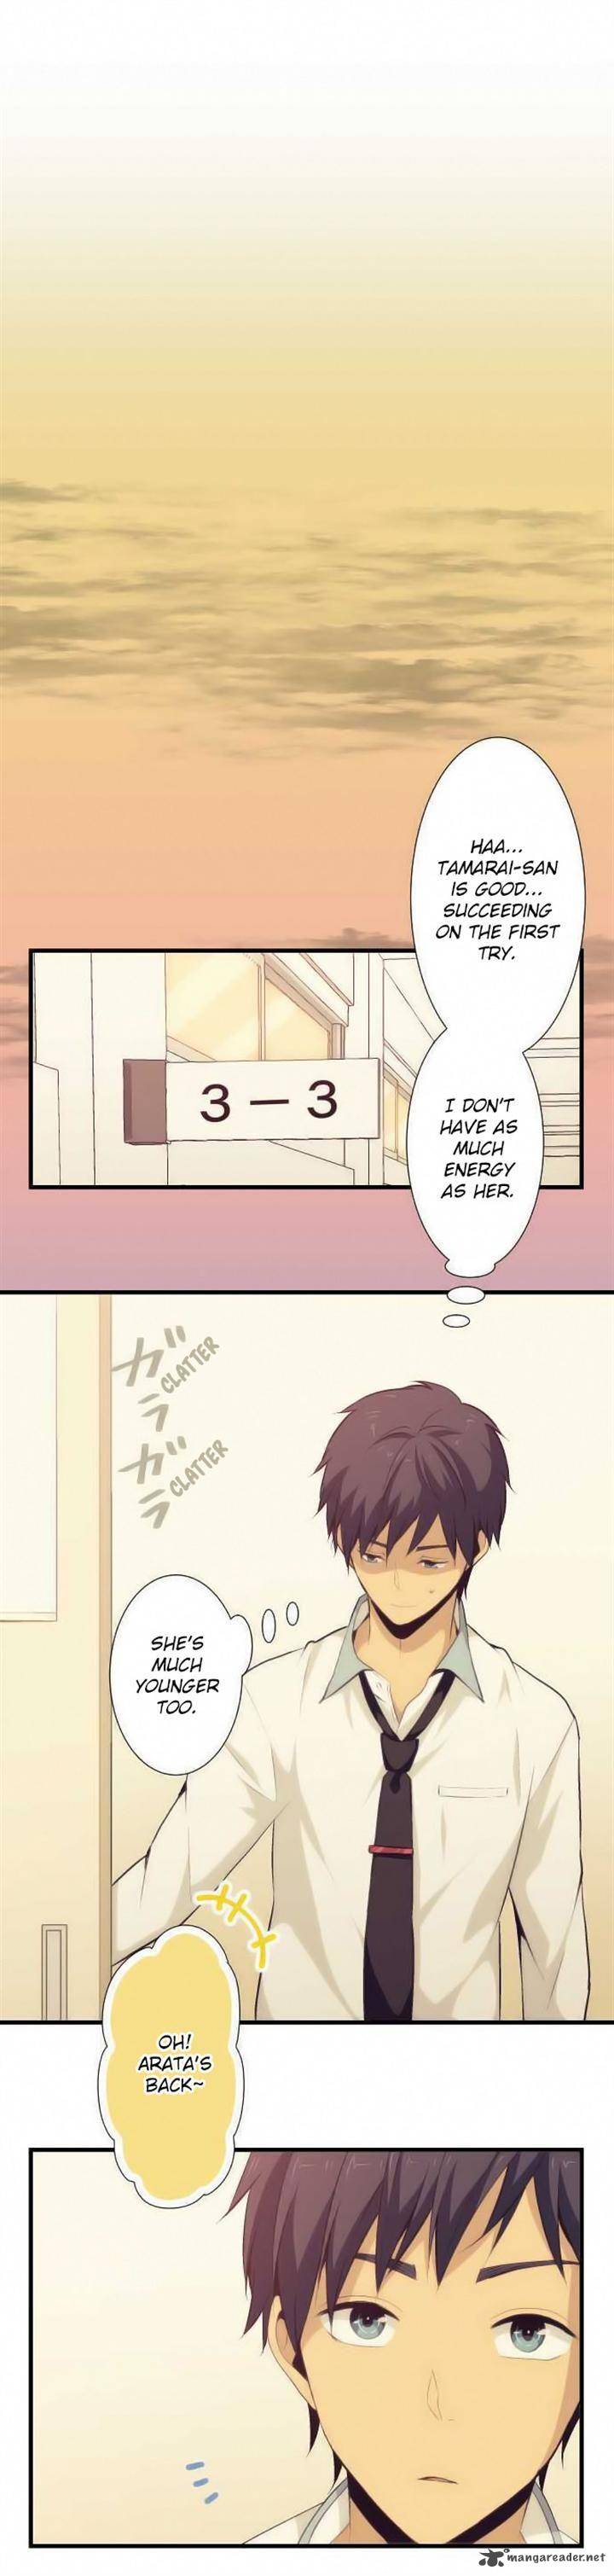 Relife 62 13